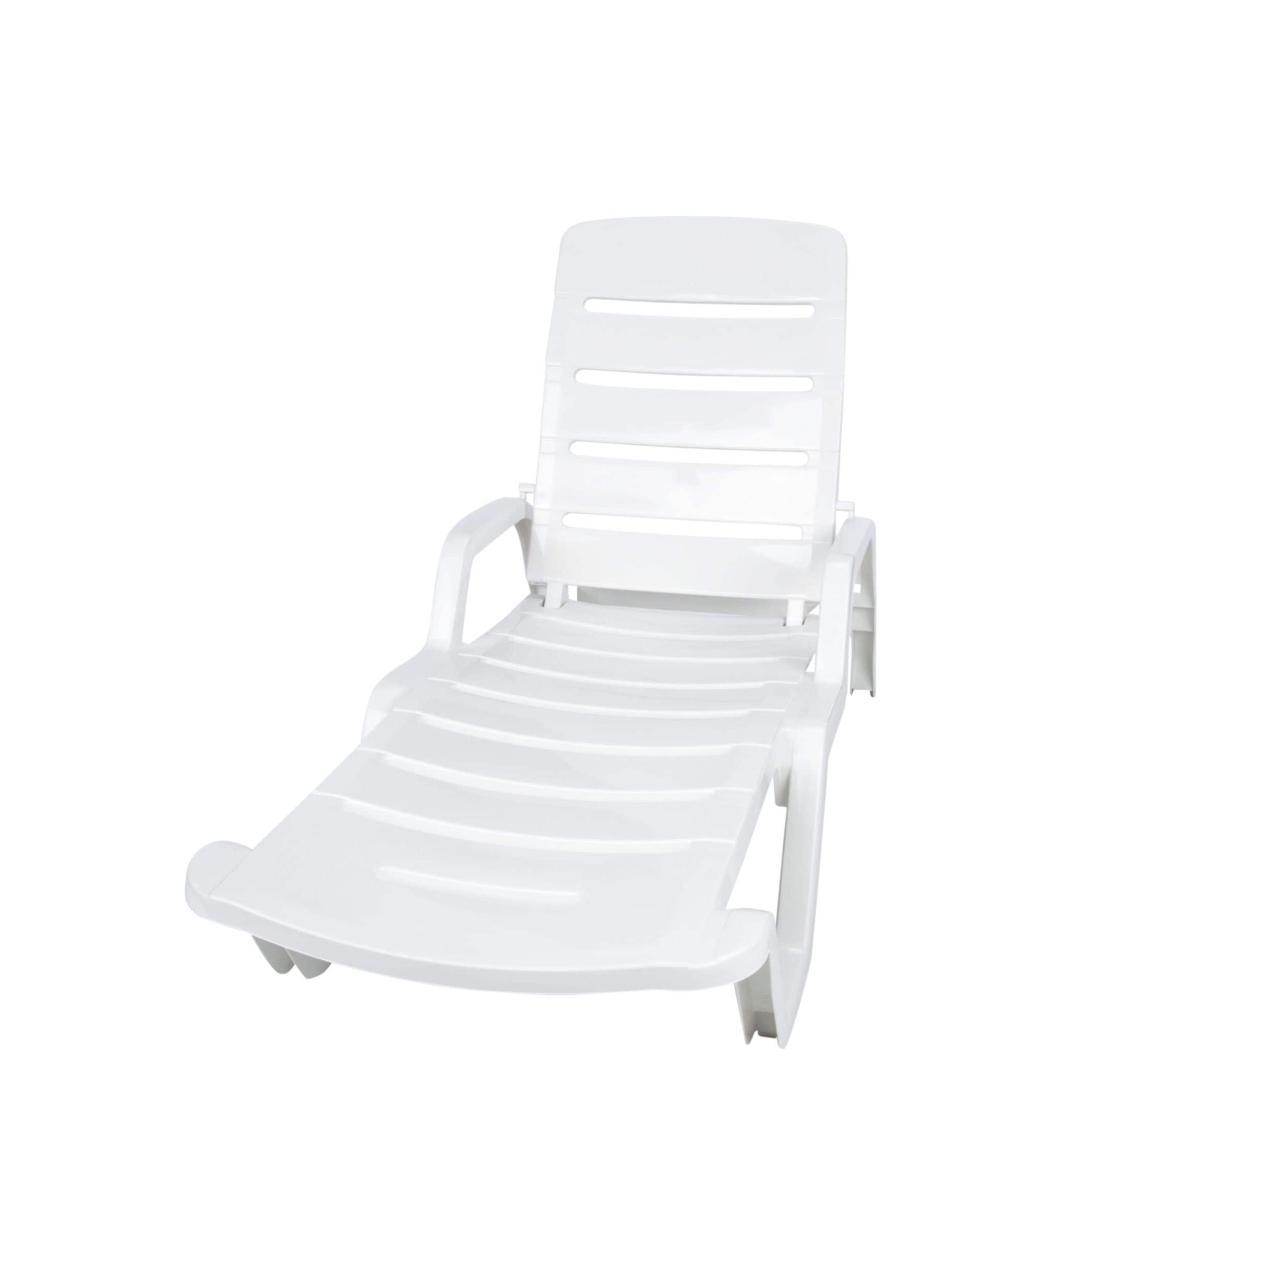 Chaise Lounge Plastic Patio Chairs At Lowes.Com